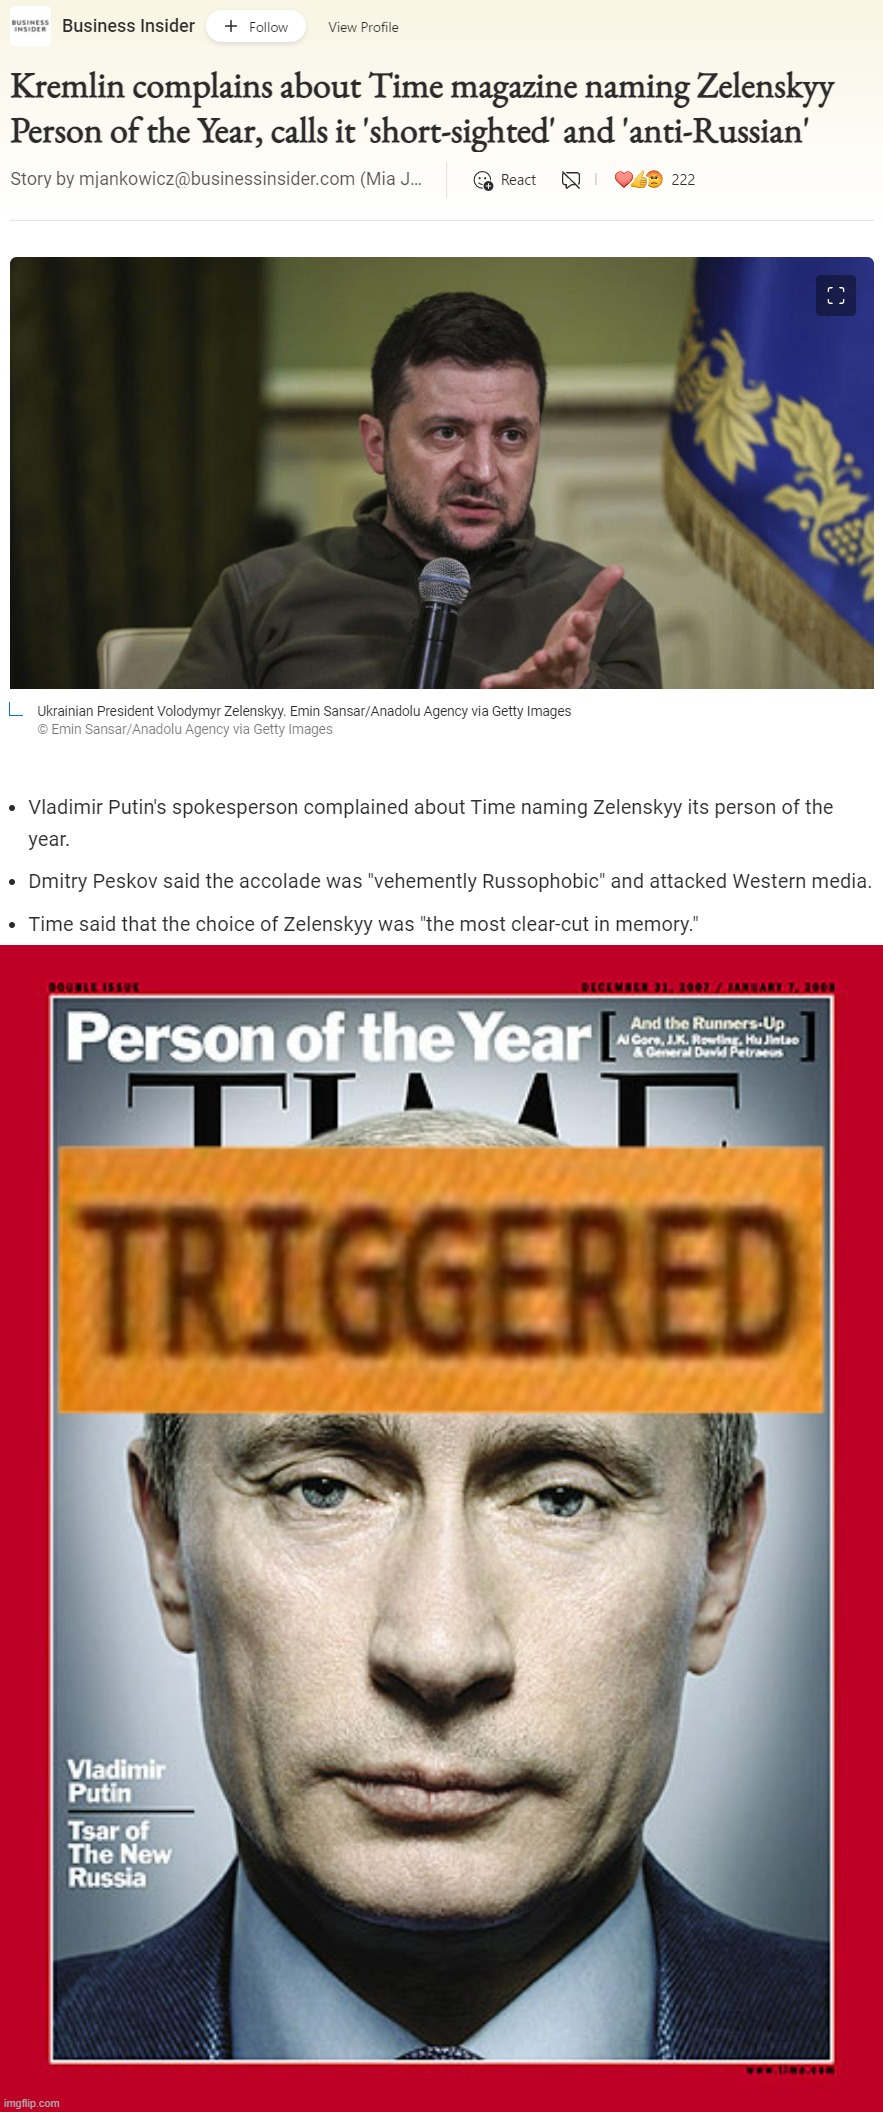 image tagged in kremlin complains about time magazine person of the year,vladimir putin time magazine person of the year | made w/ Imgflip meme maker